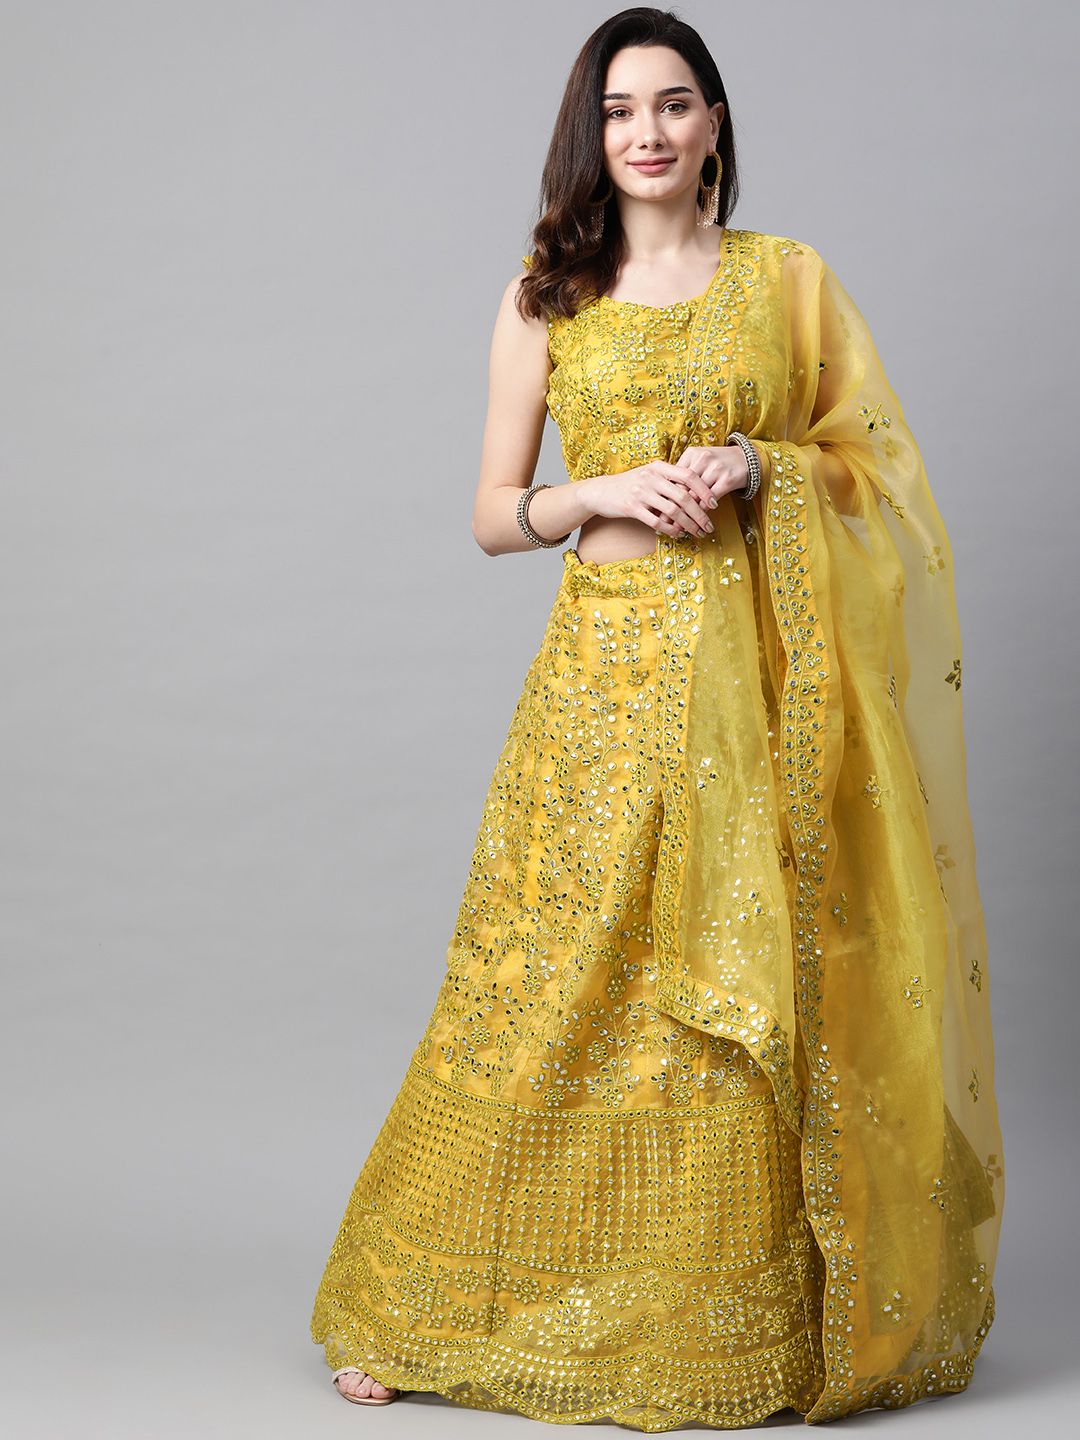 Readiprint Fashions Yellow Embroidered Mirror Work Semi-Stitched Lehenga & Unstitched Blouse With Dupatta Price in India